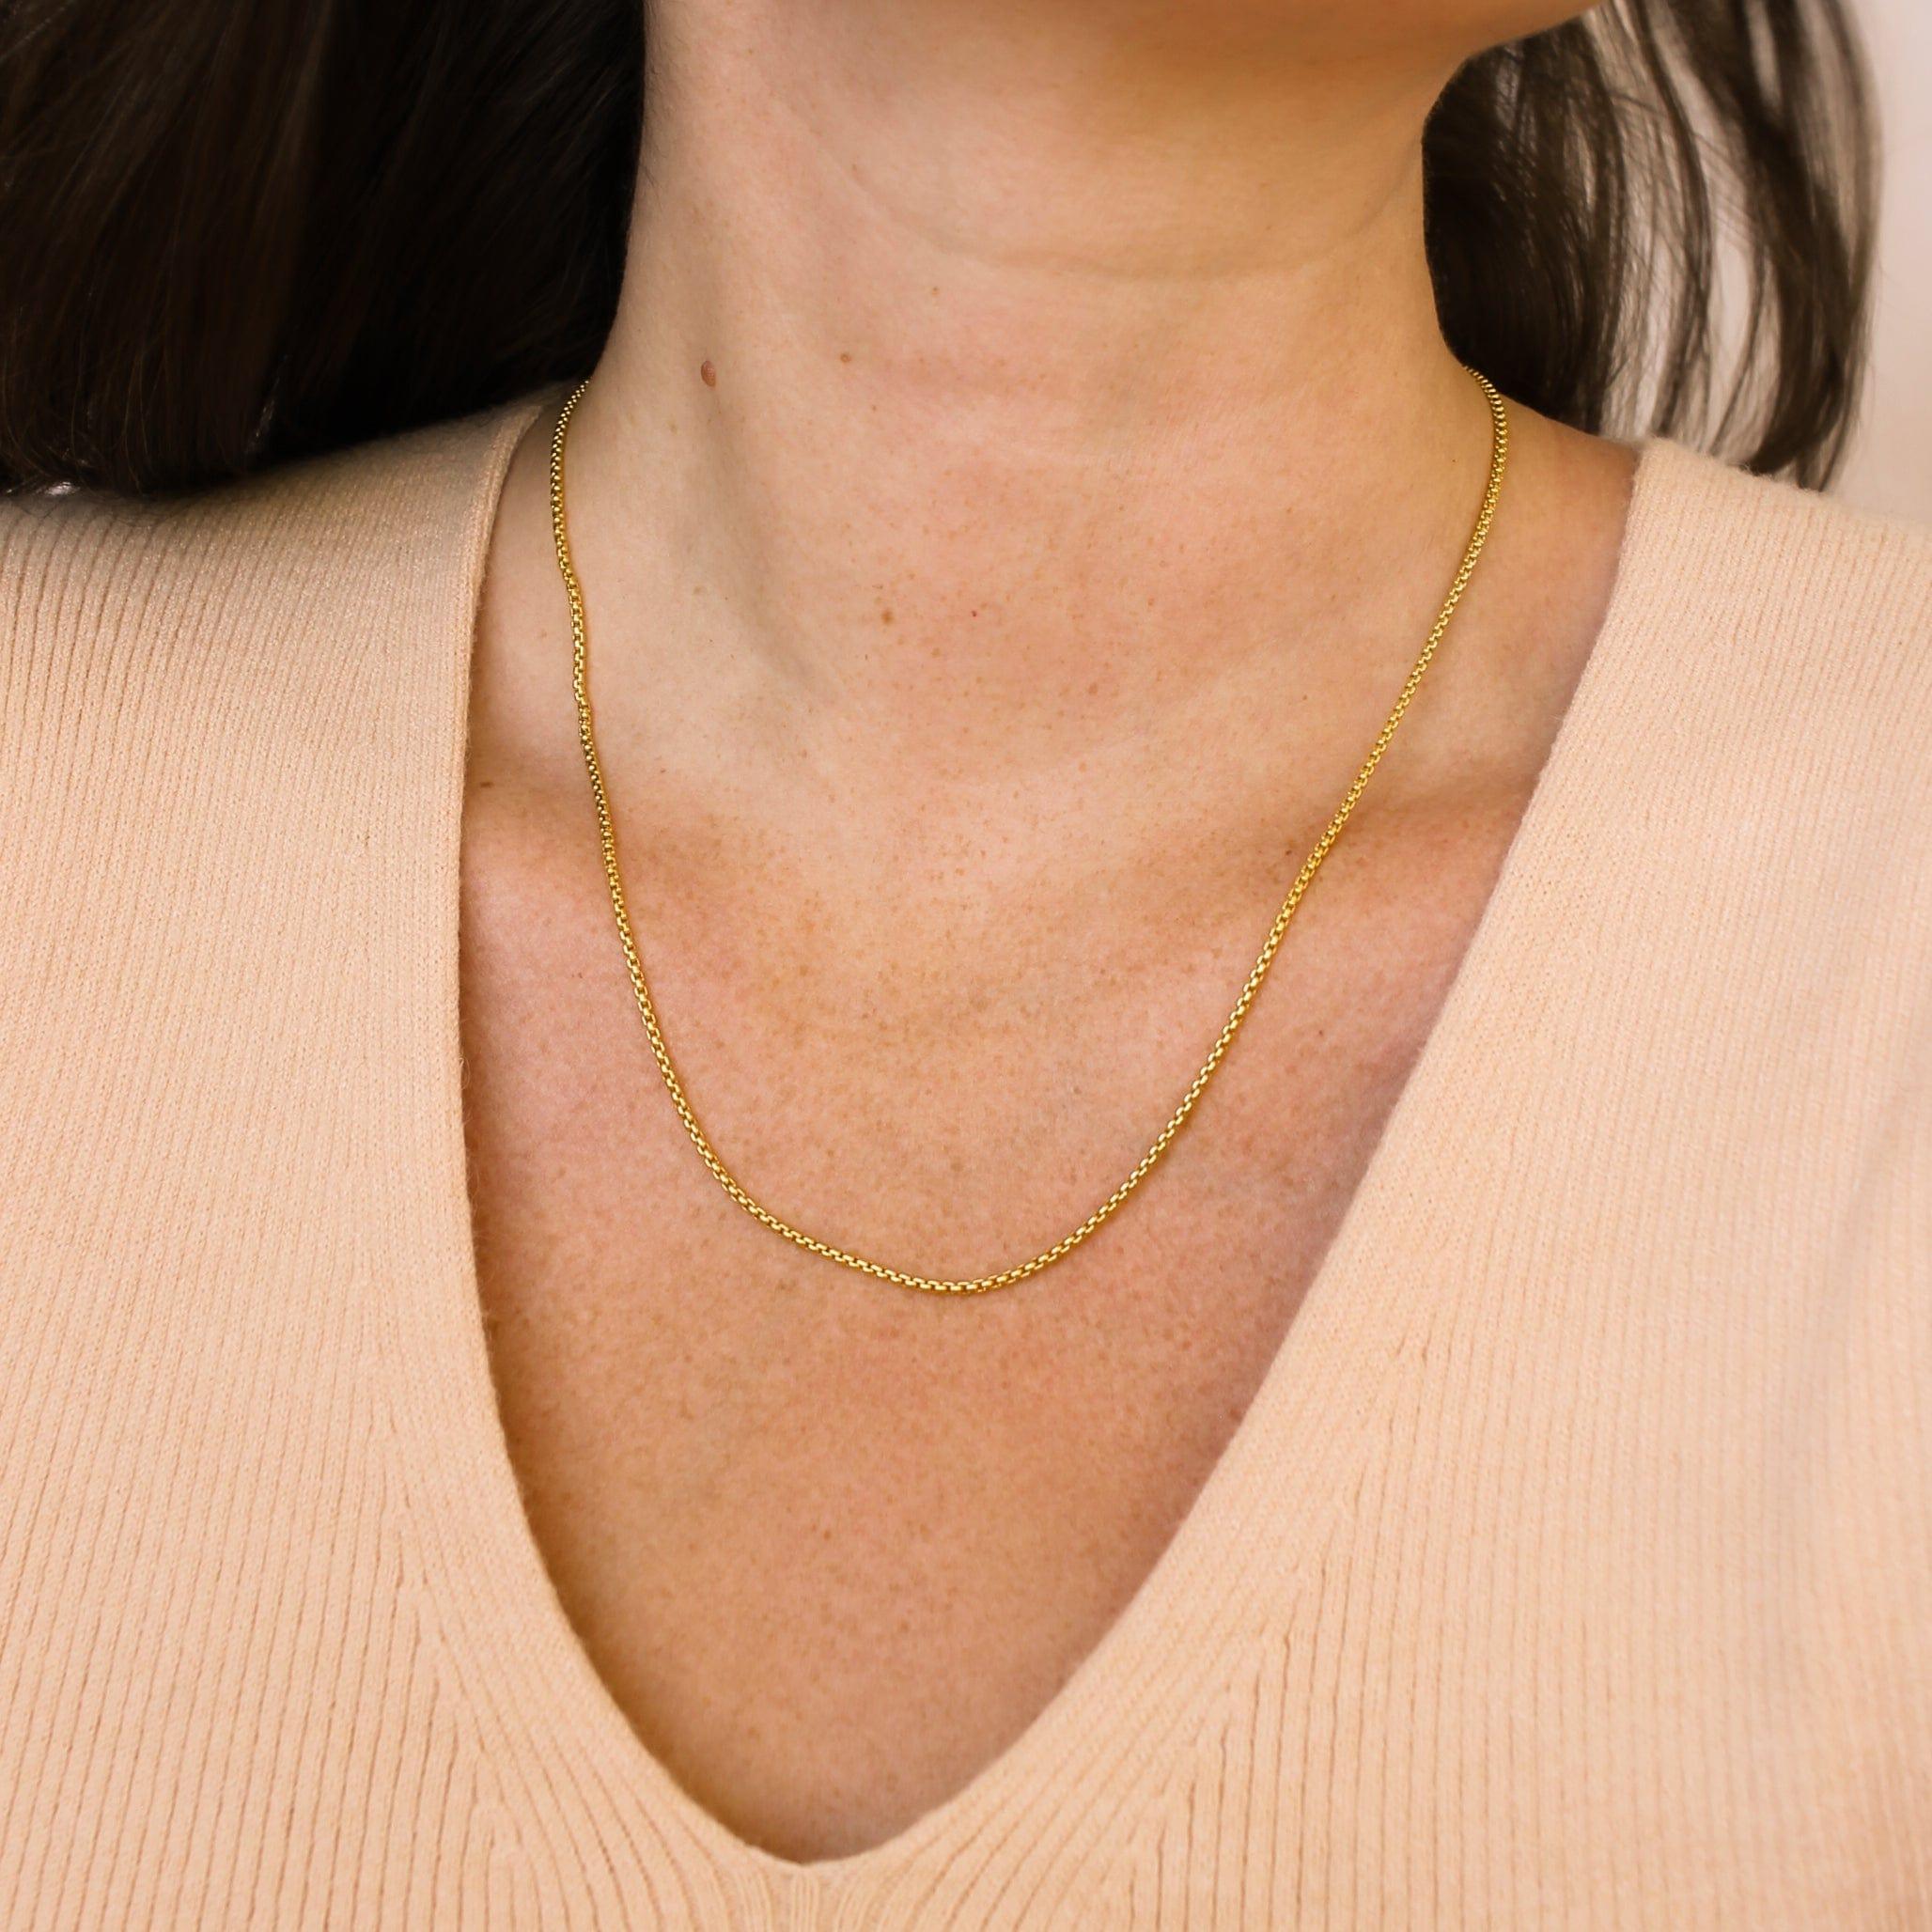 Box Chain Necklace - Nolia Jewelry - Meaningful + Sustainably Handcrafted Jewelry